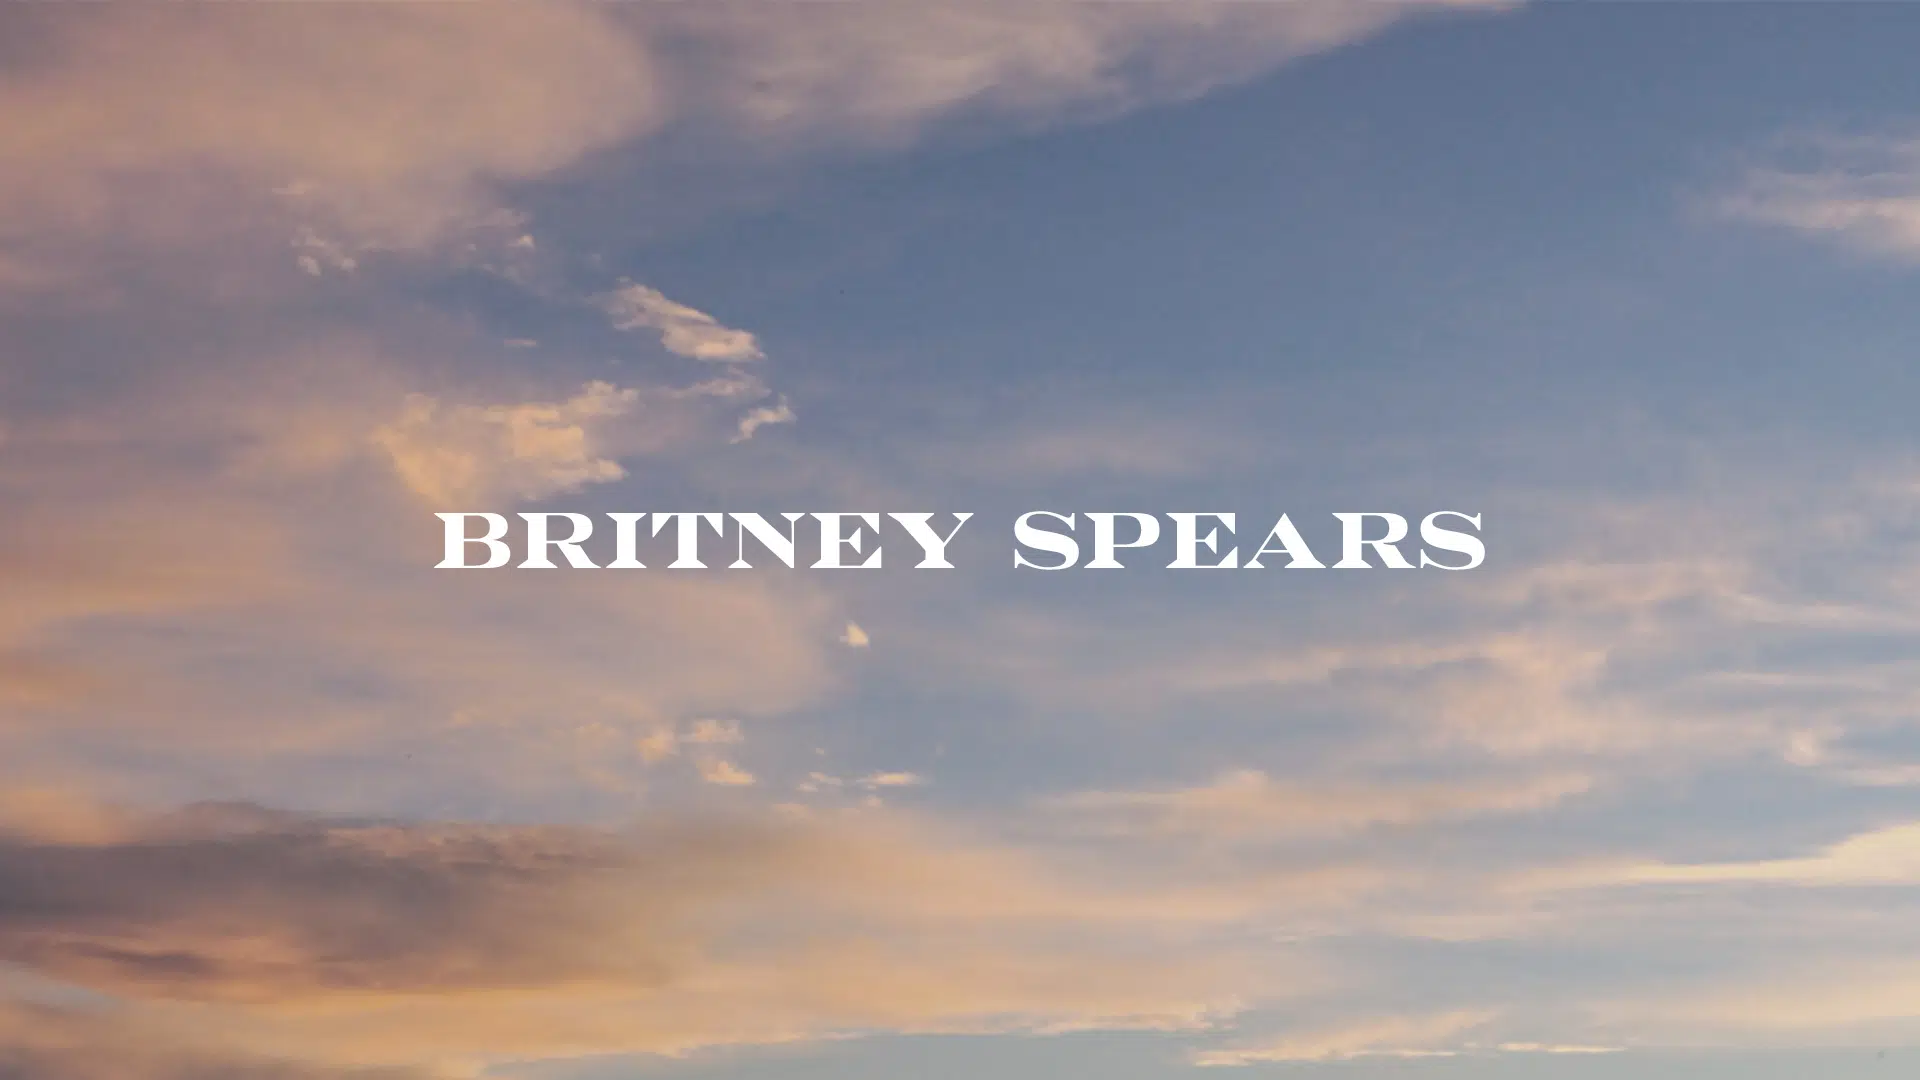 (New Music) Britney Spears and Backstreet Boys - Matches